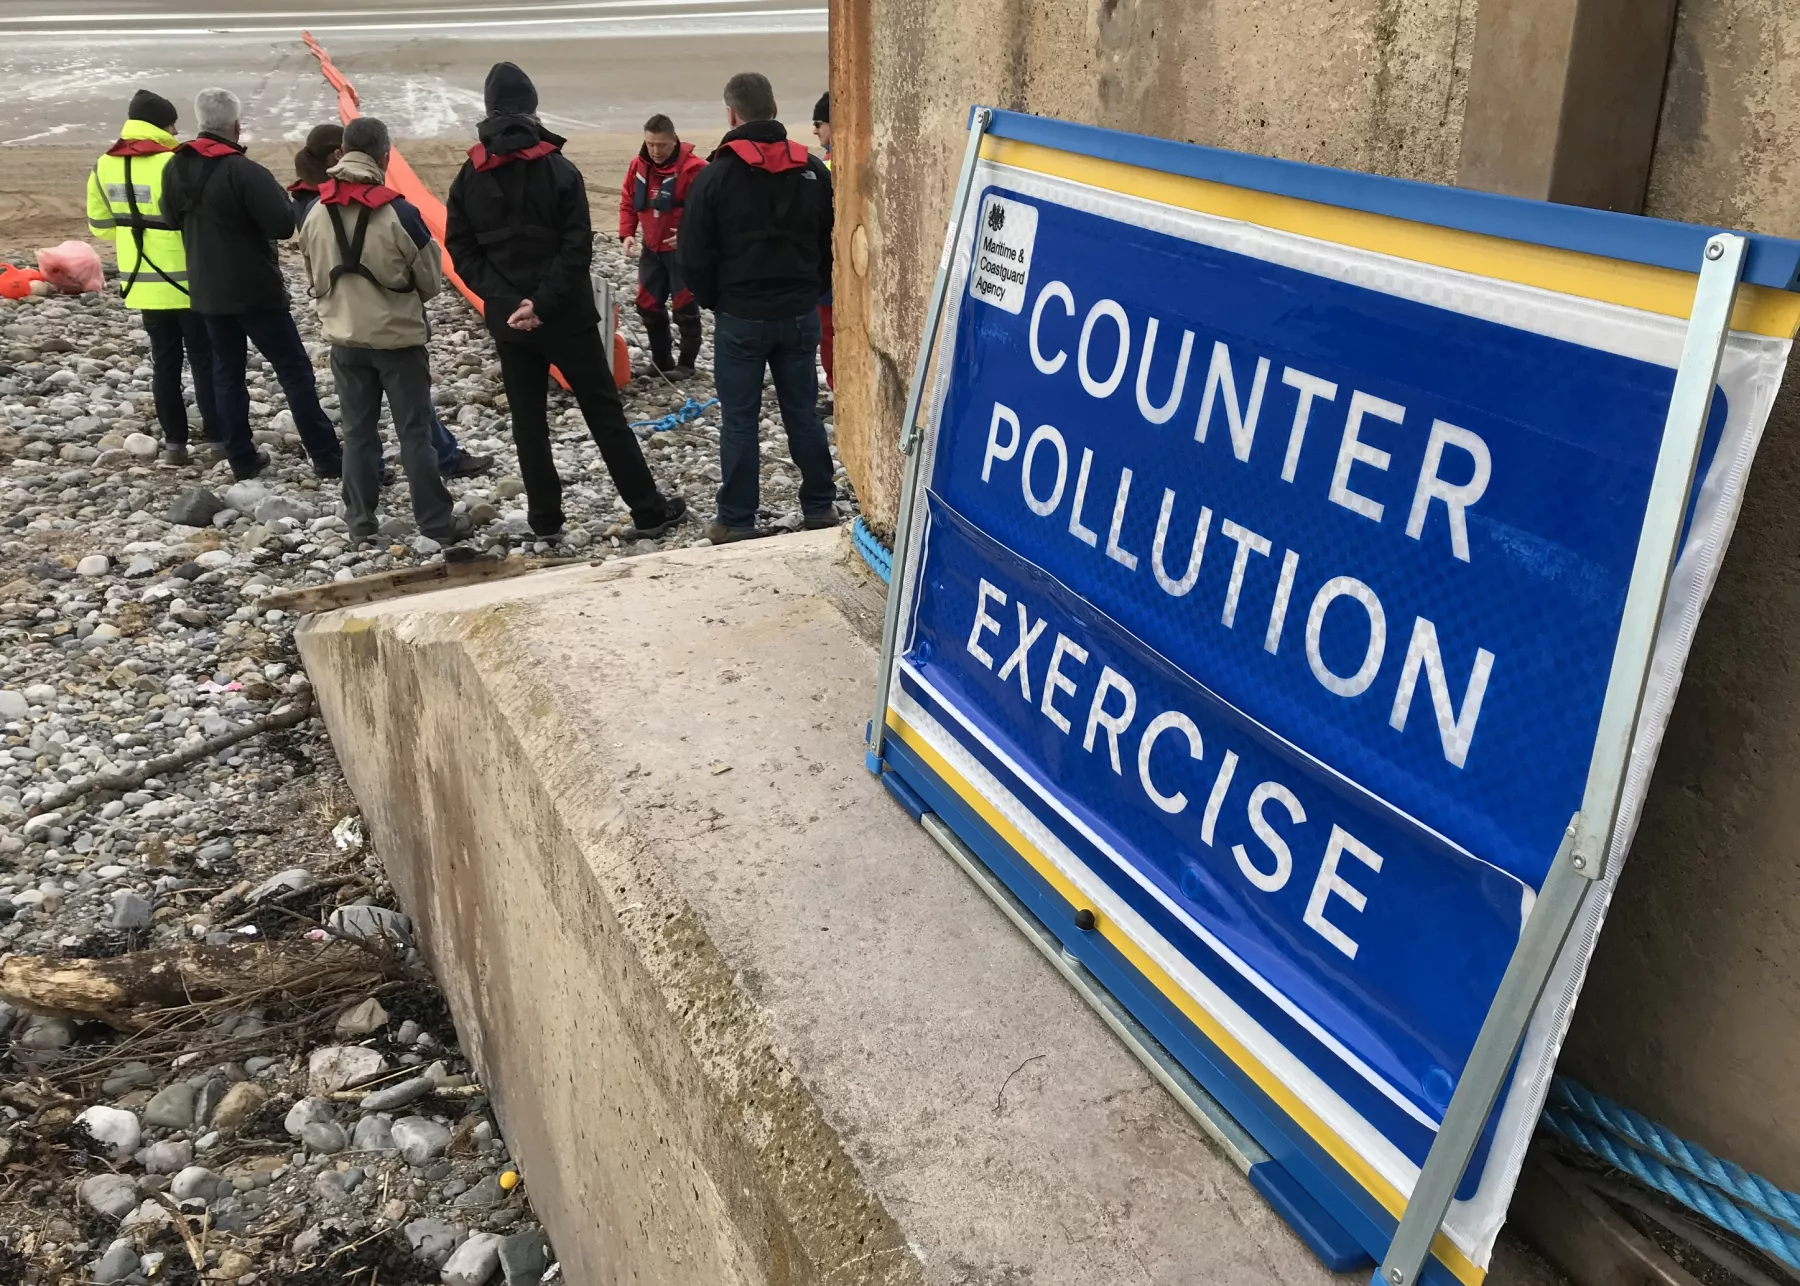 A counter-pollution exercise warning size at a previous operation in Llandudno (Photo: stock image)